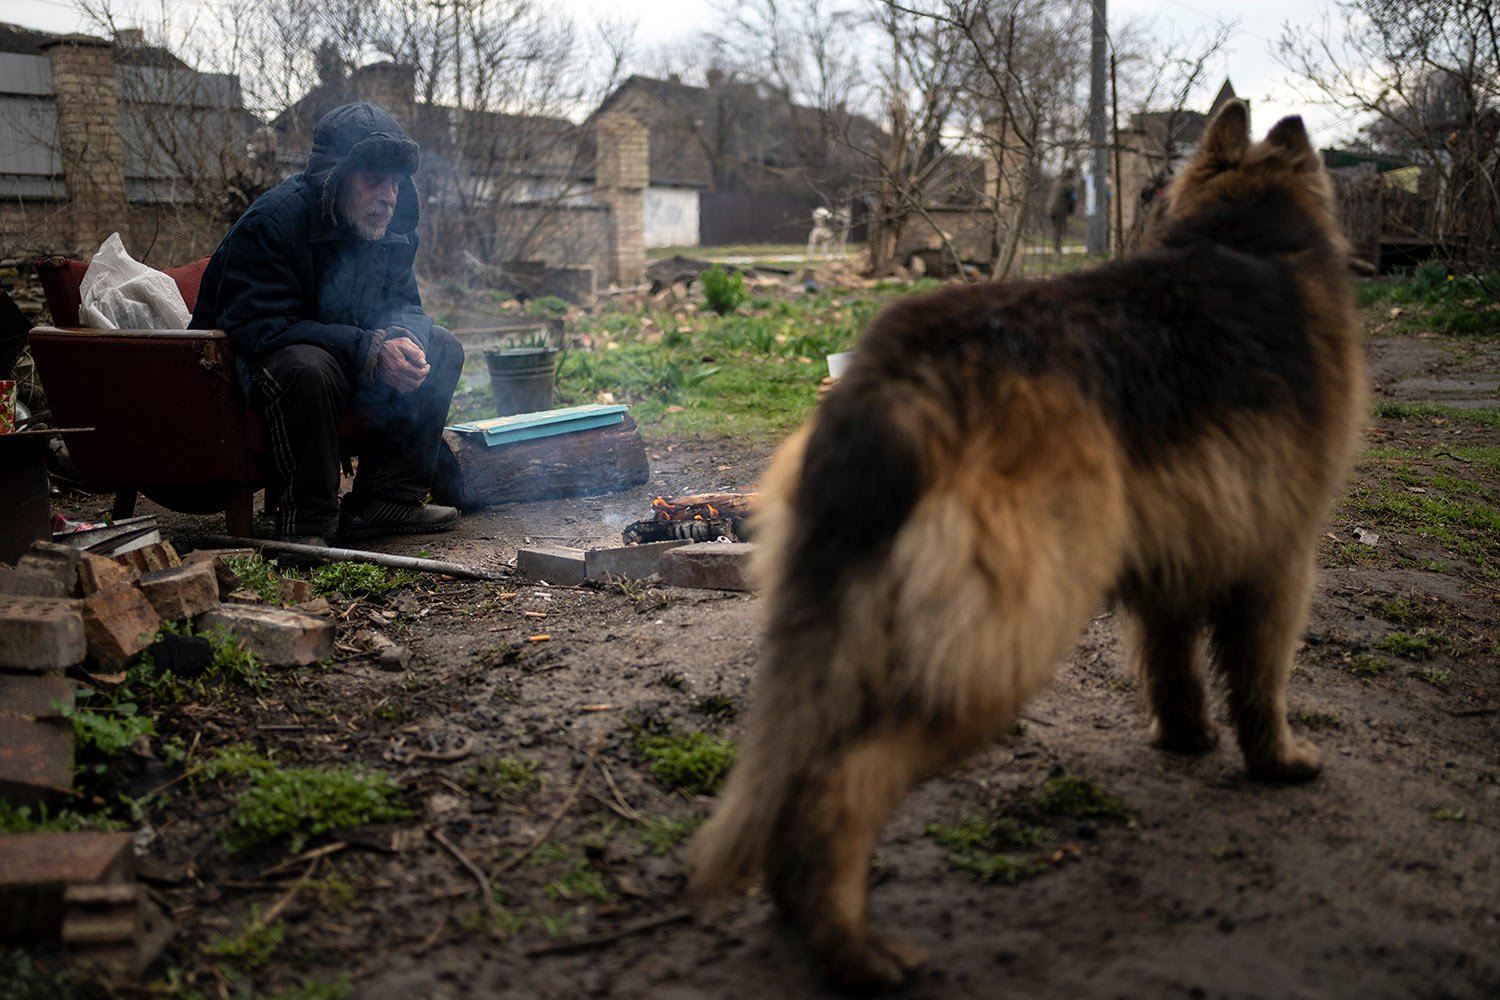  Gregoriev warms himself with a fire in the yard of his house in Bucha, in the outskirts of Kyiv, Ukraine, Saturday, April 9, 2022, which was badly damaged in the war caused by Russia's invasion. (AP Photo/Rodrigo Abd) 